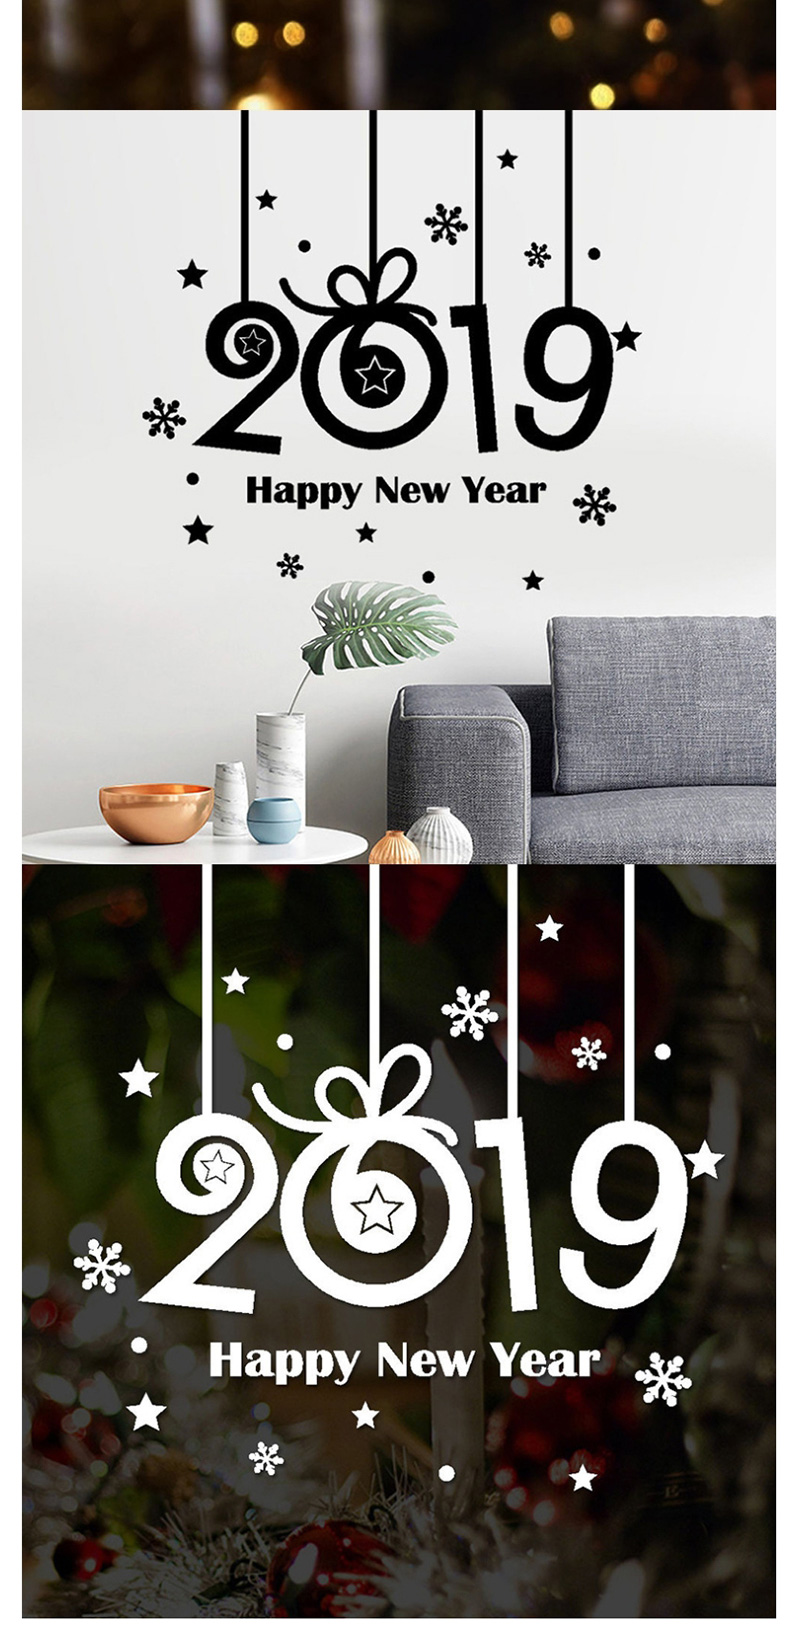 Fashion Red Christmas Wall Sticker,Festival & Party Supplies